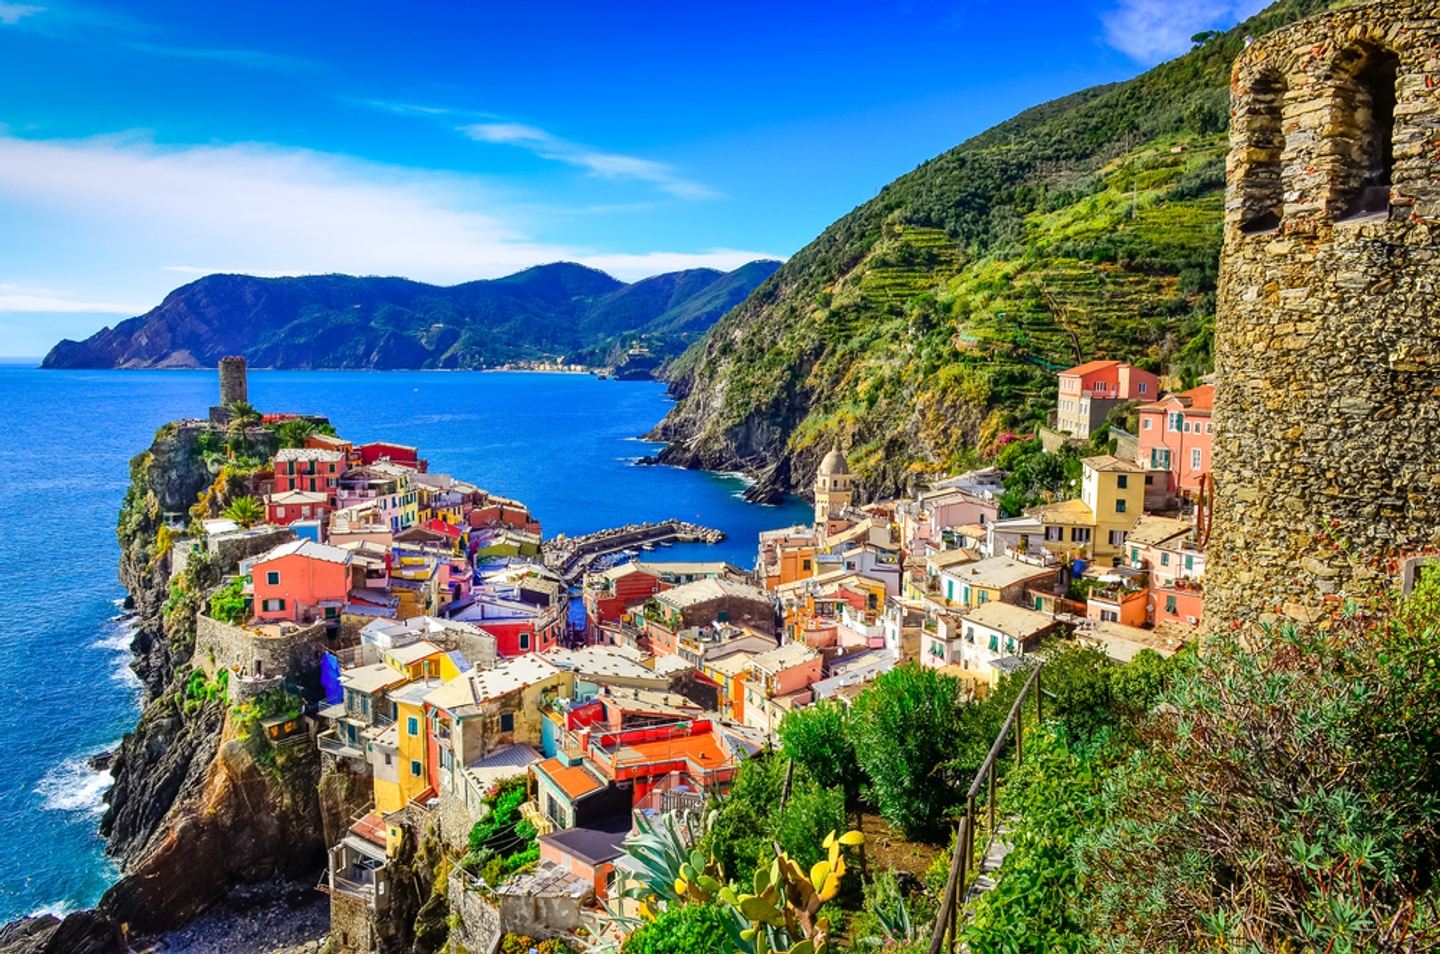 Yoga experience in the stunning Cinque Terre, 6 days